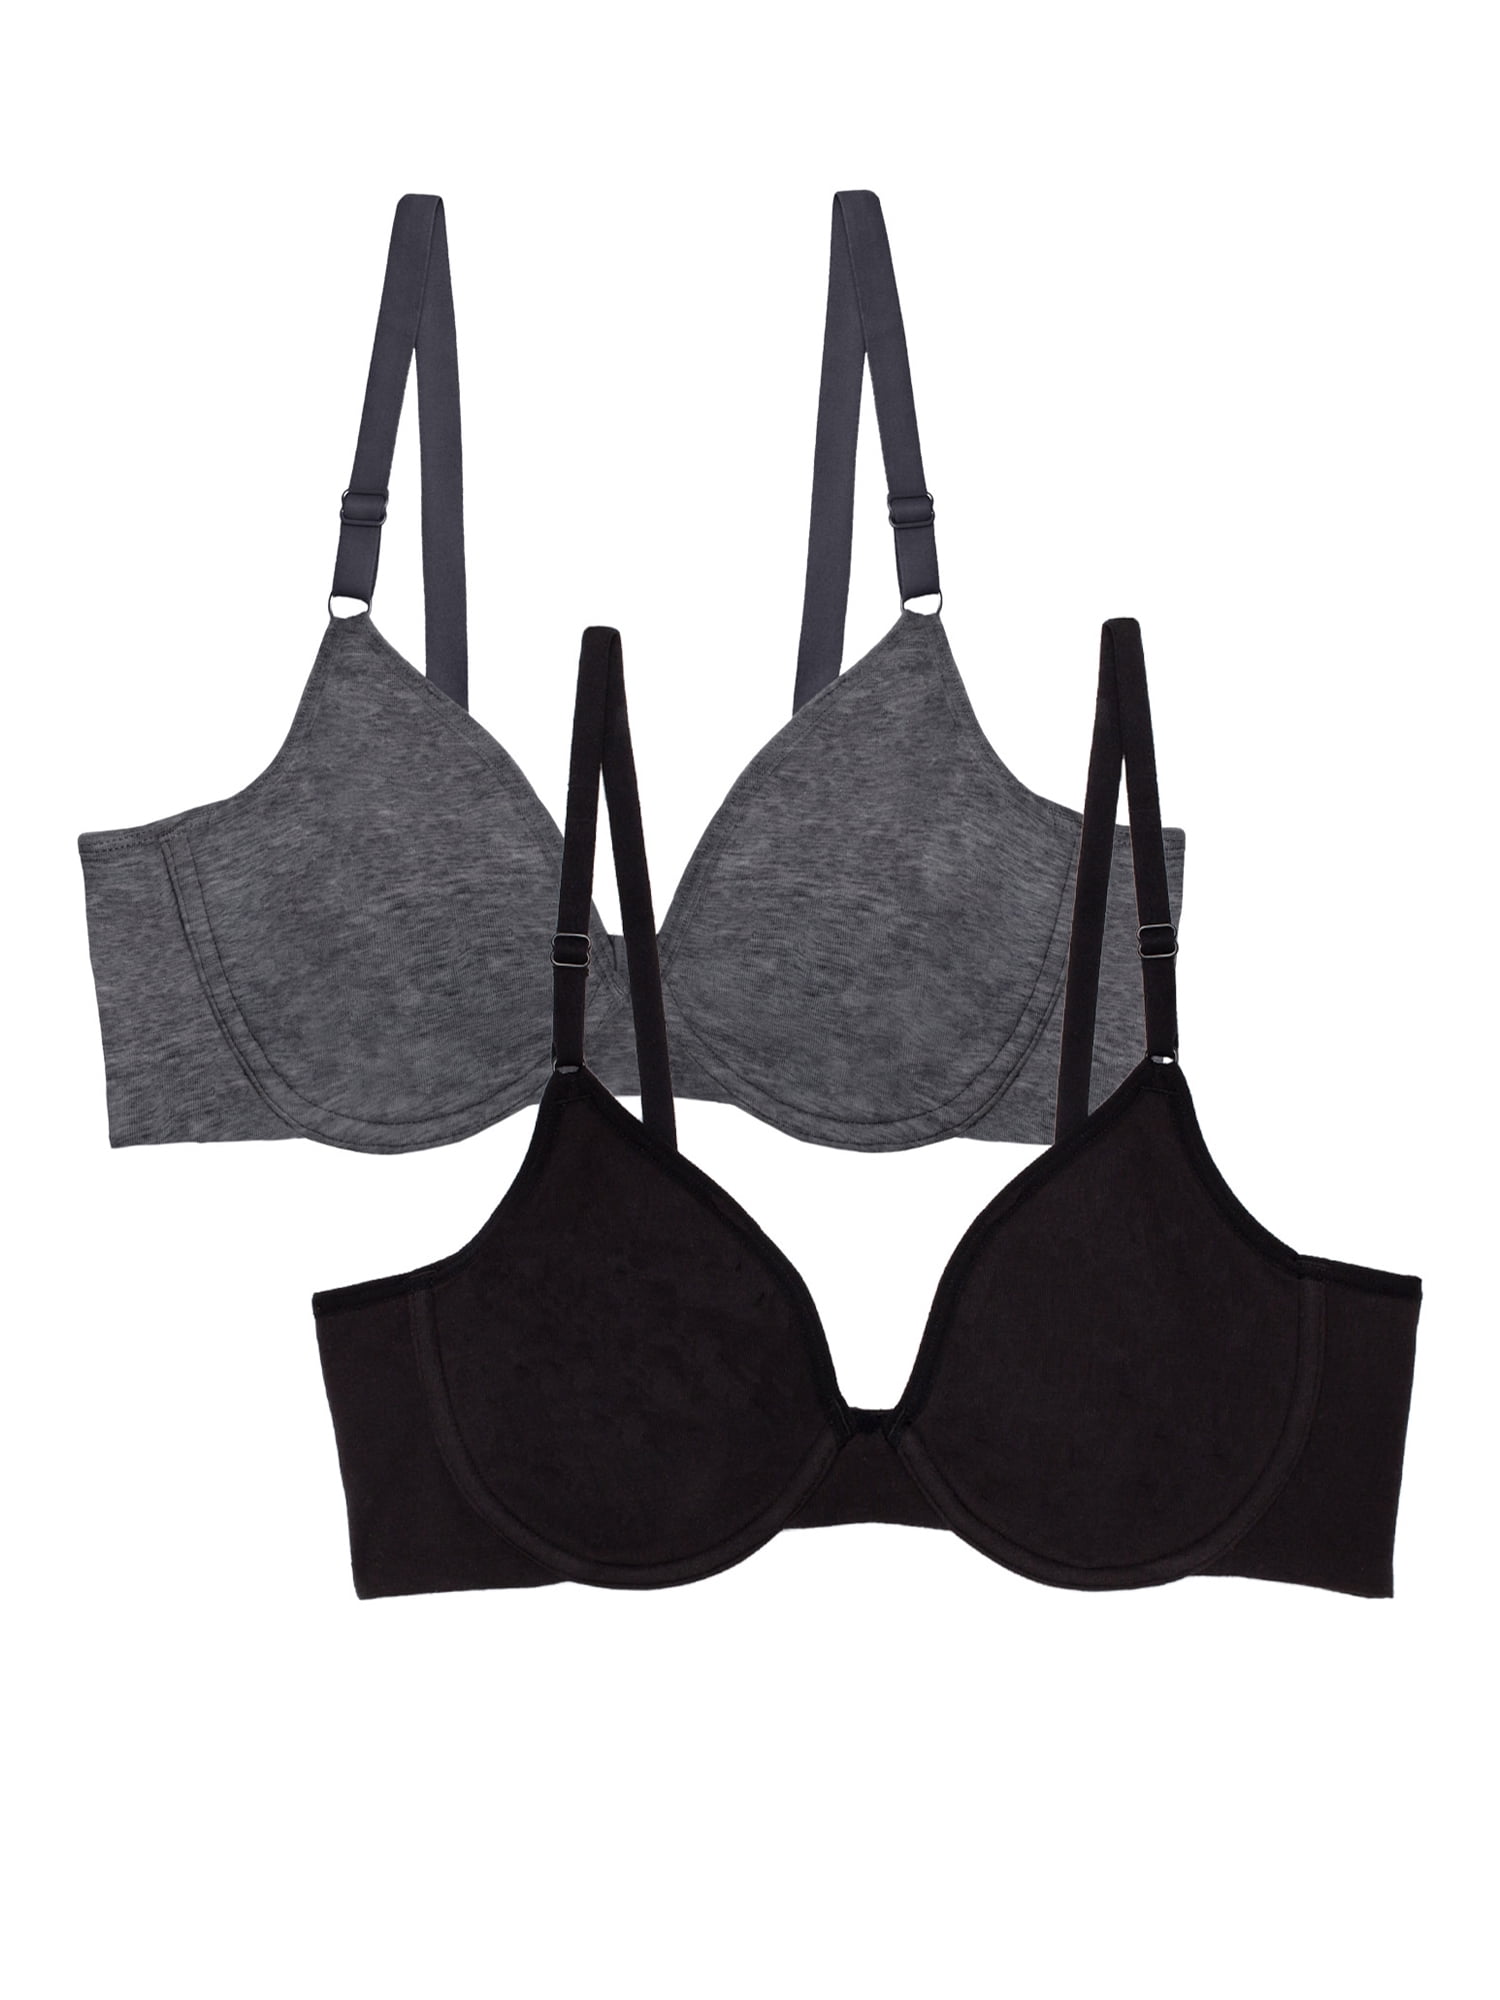 Fruit of the Loom Women's Cotton Stretch Extreme Comfort Bra, Style FT920,  2-Pack